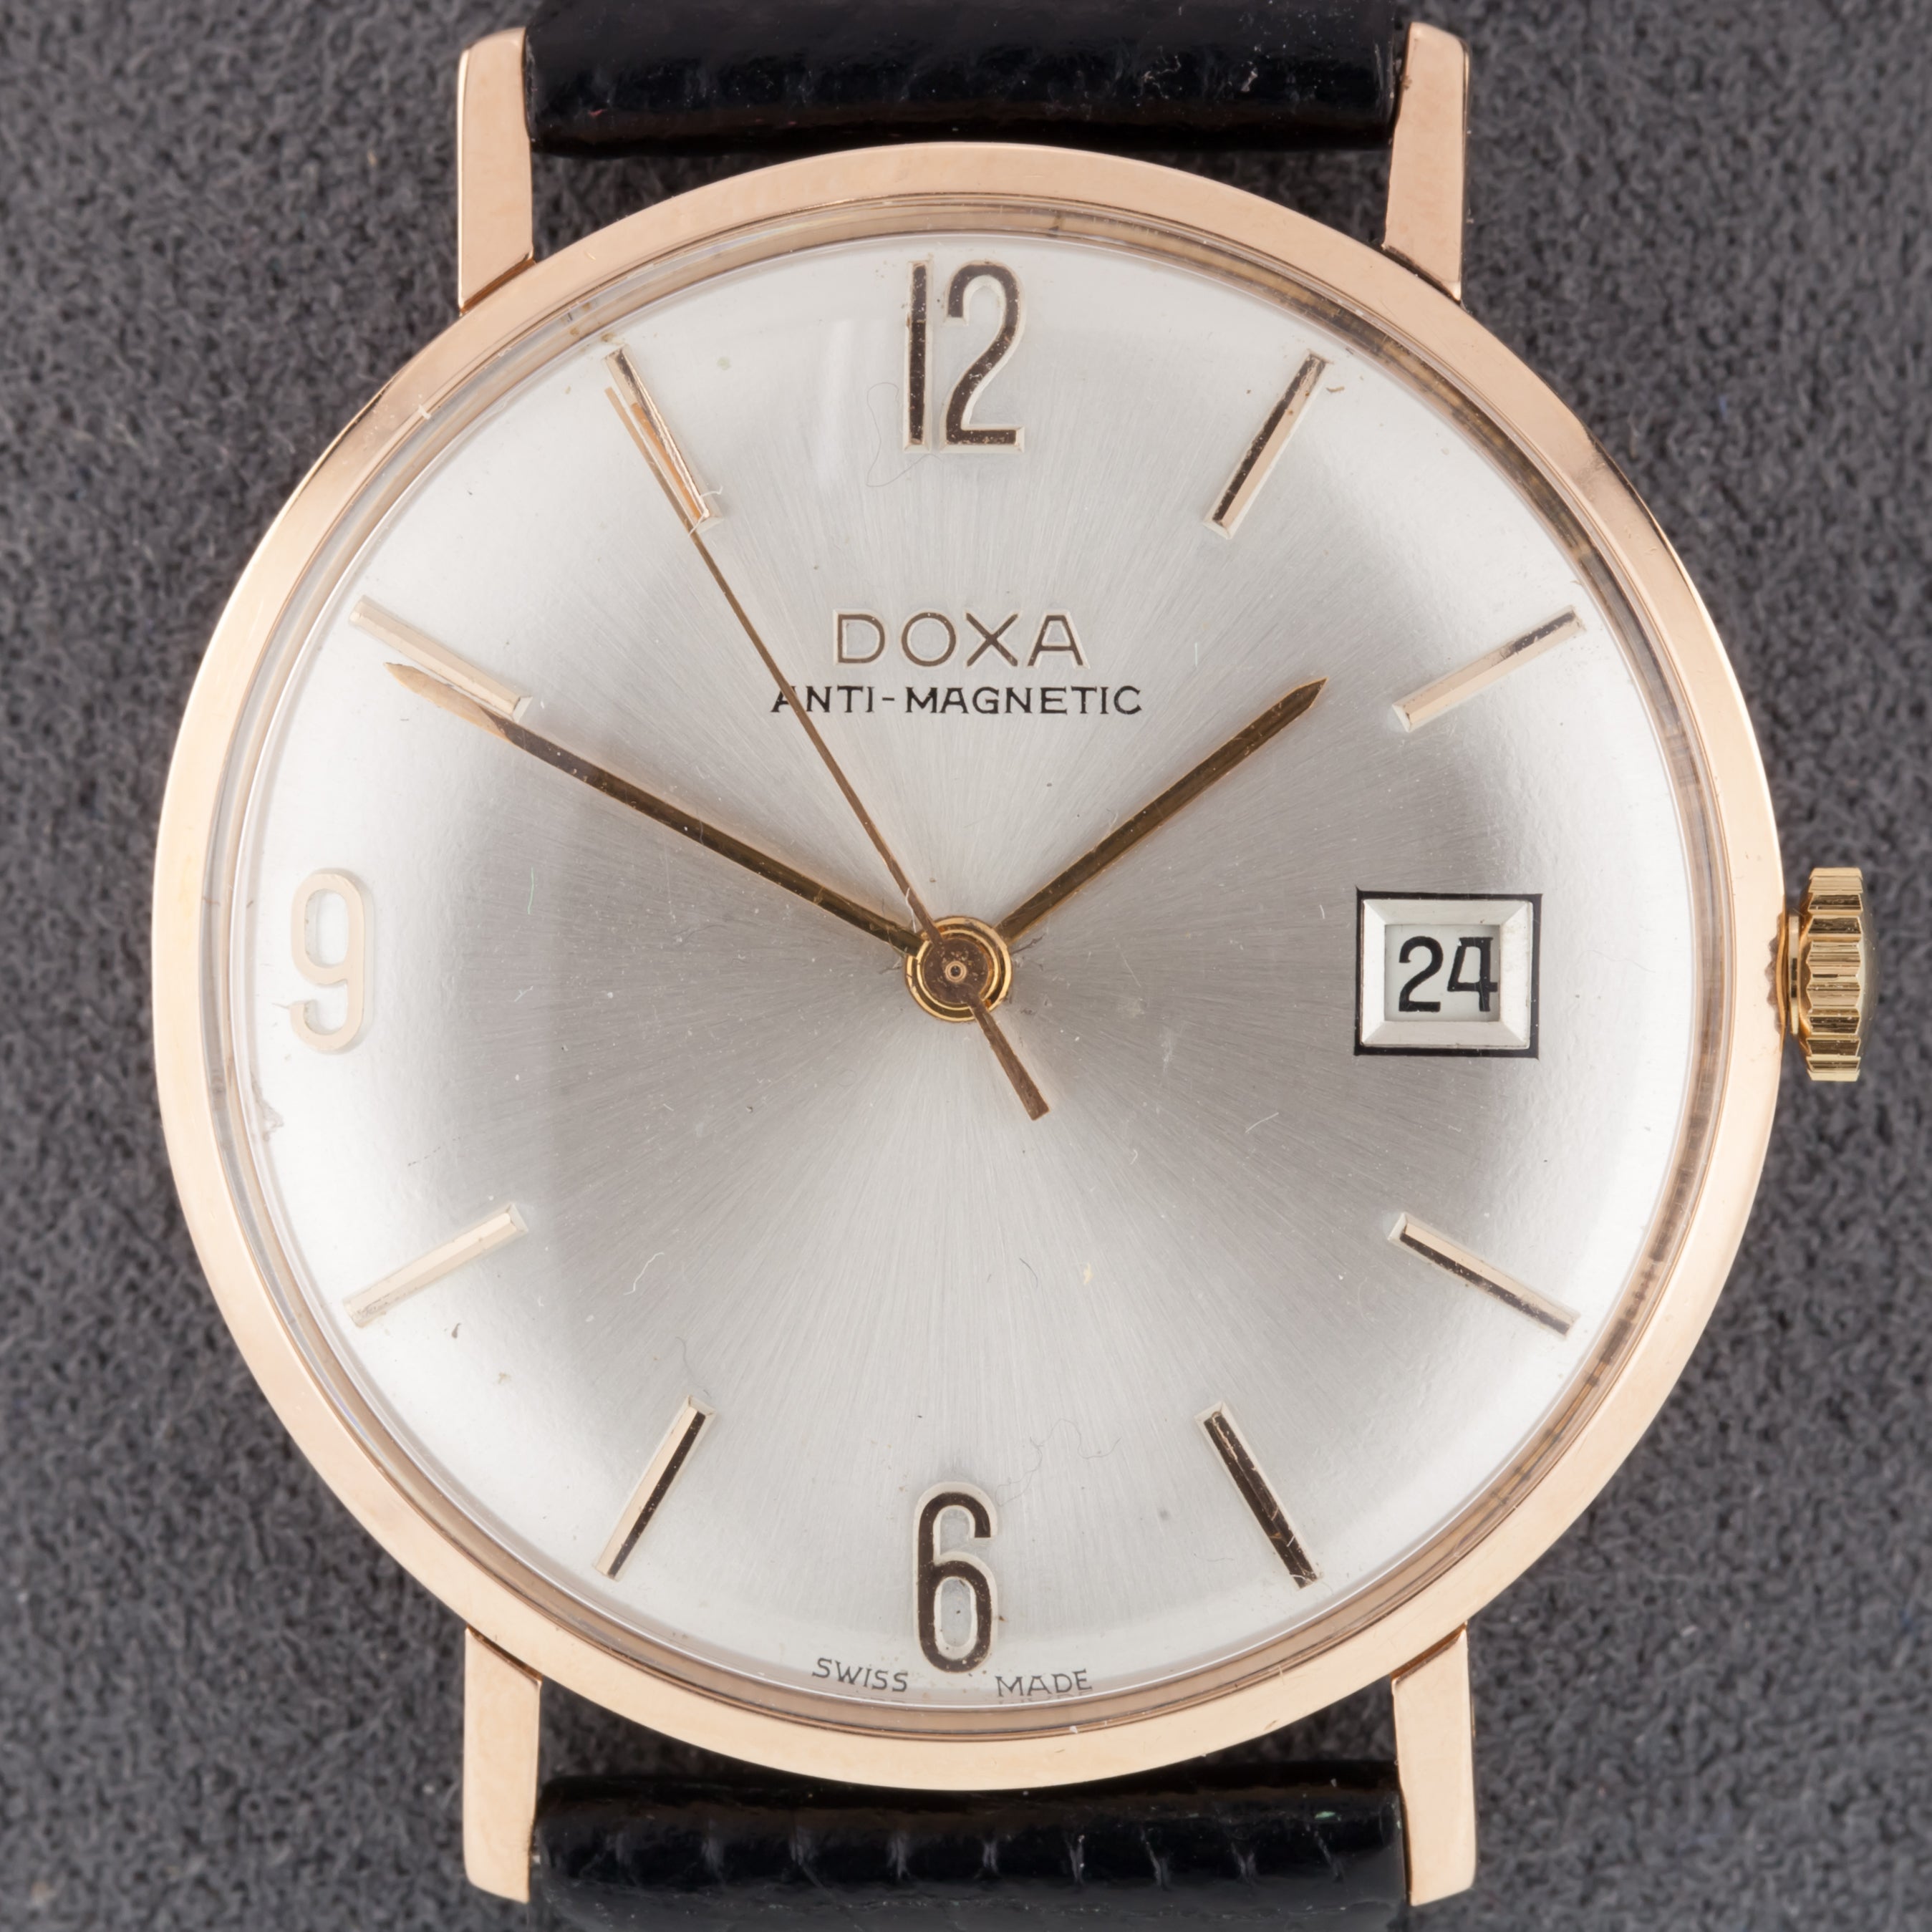 Doxa 14k Rose Gold Hand-Winding Anti-Magnetic Watch w/ Date Movement #111
Movement #111

Case #1176514-1363103
14k Rose Gold Case
35 mm in Diameter (36 mm w/ Crown)
Lug-to-Lug Distance = 40 mm
Lug-to-Lug Width = 18 mm
Thickness = 8 mm

Champagne